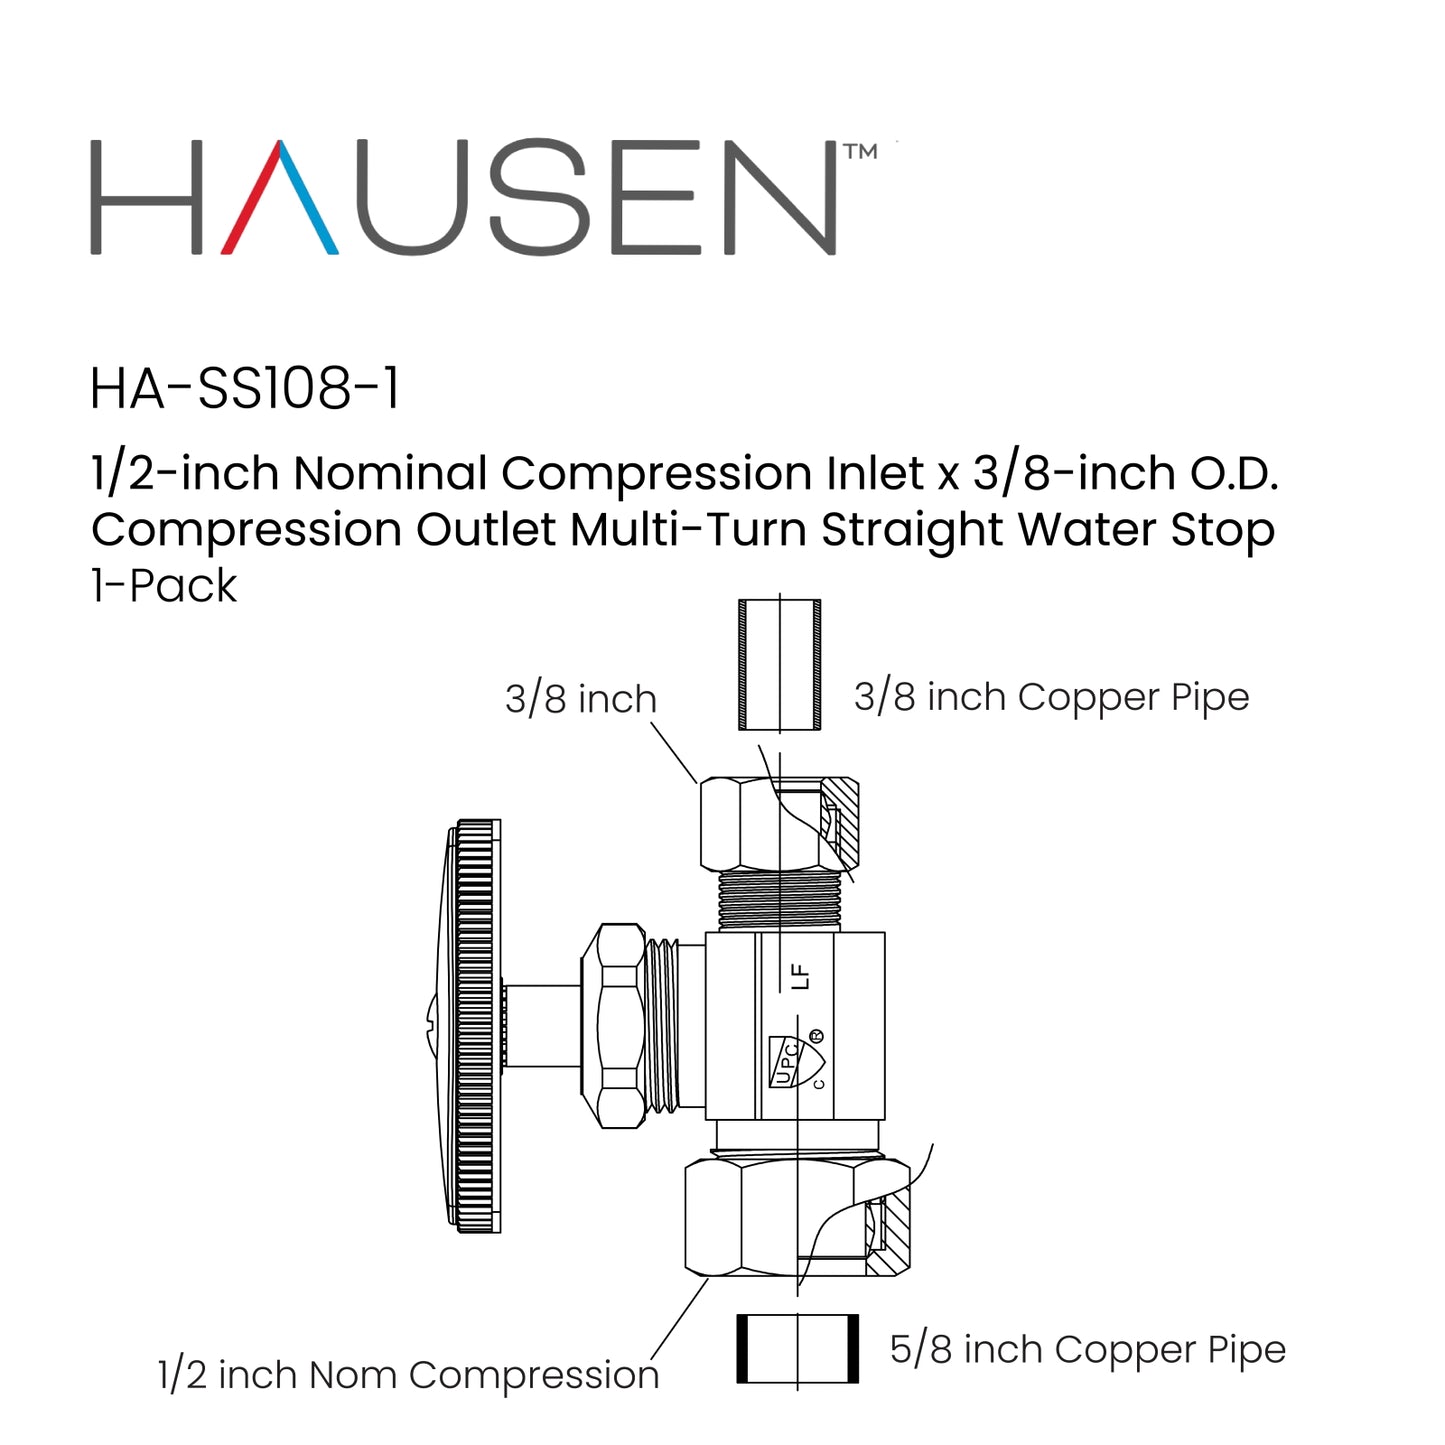 Hausen 1/2-inch Nominal Compression Inlet x 3/8-inch O.D. Compression Outlet Multi-Turn Straight Water Stop, 1-Pack